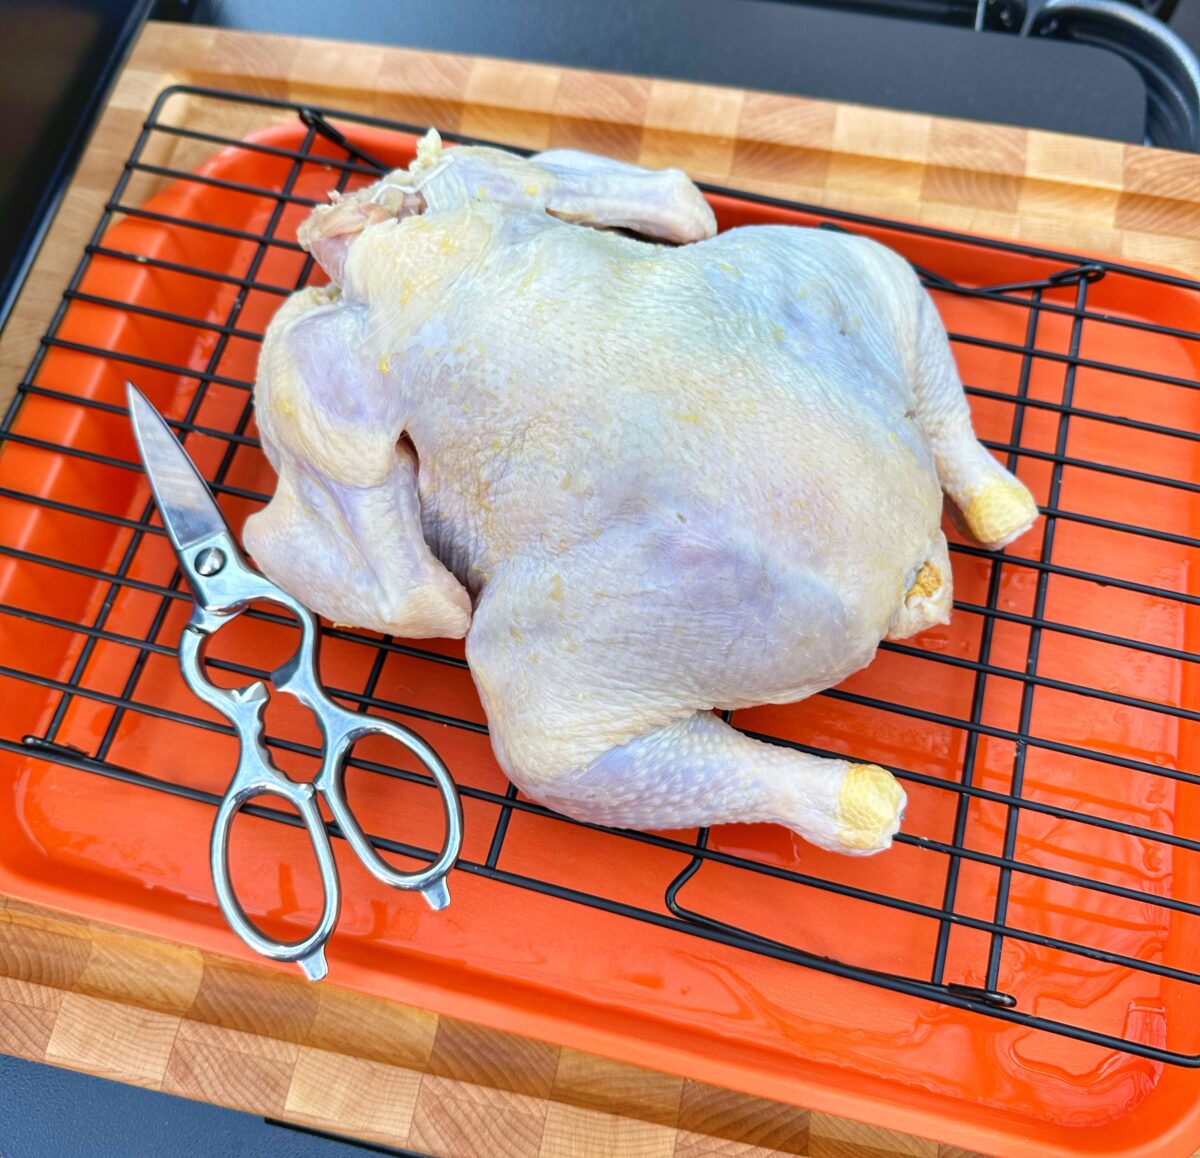 Whole chicken on a metal rack before being cut.